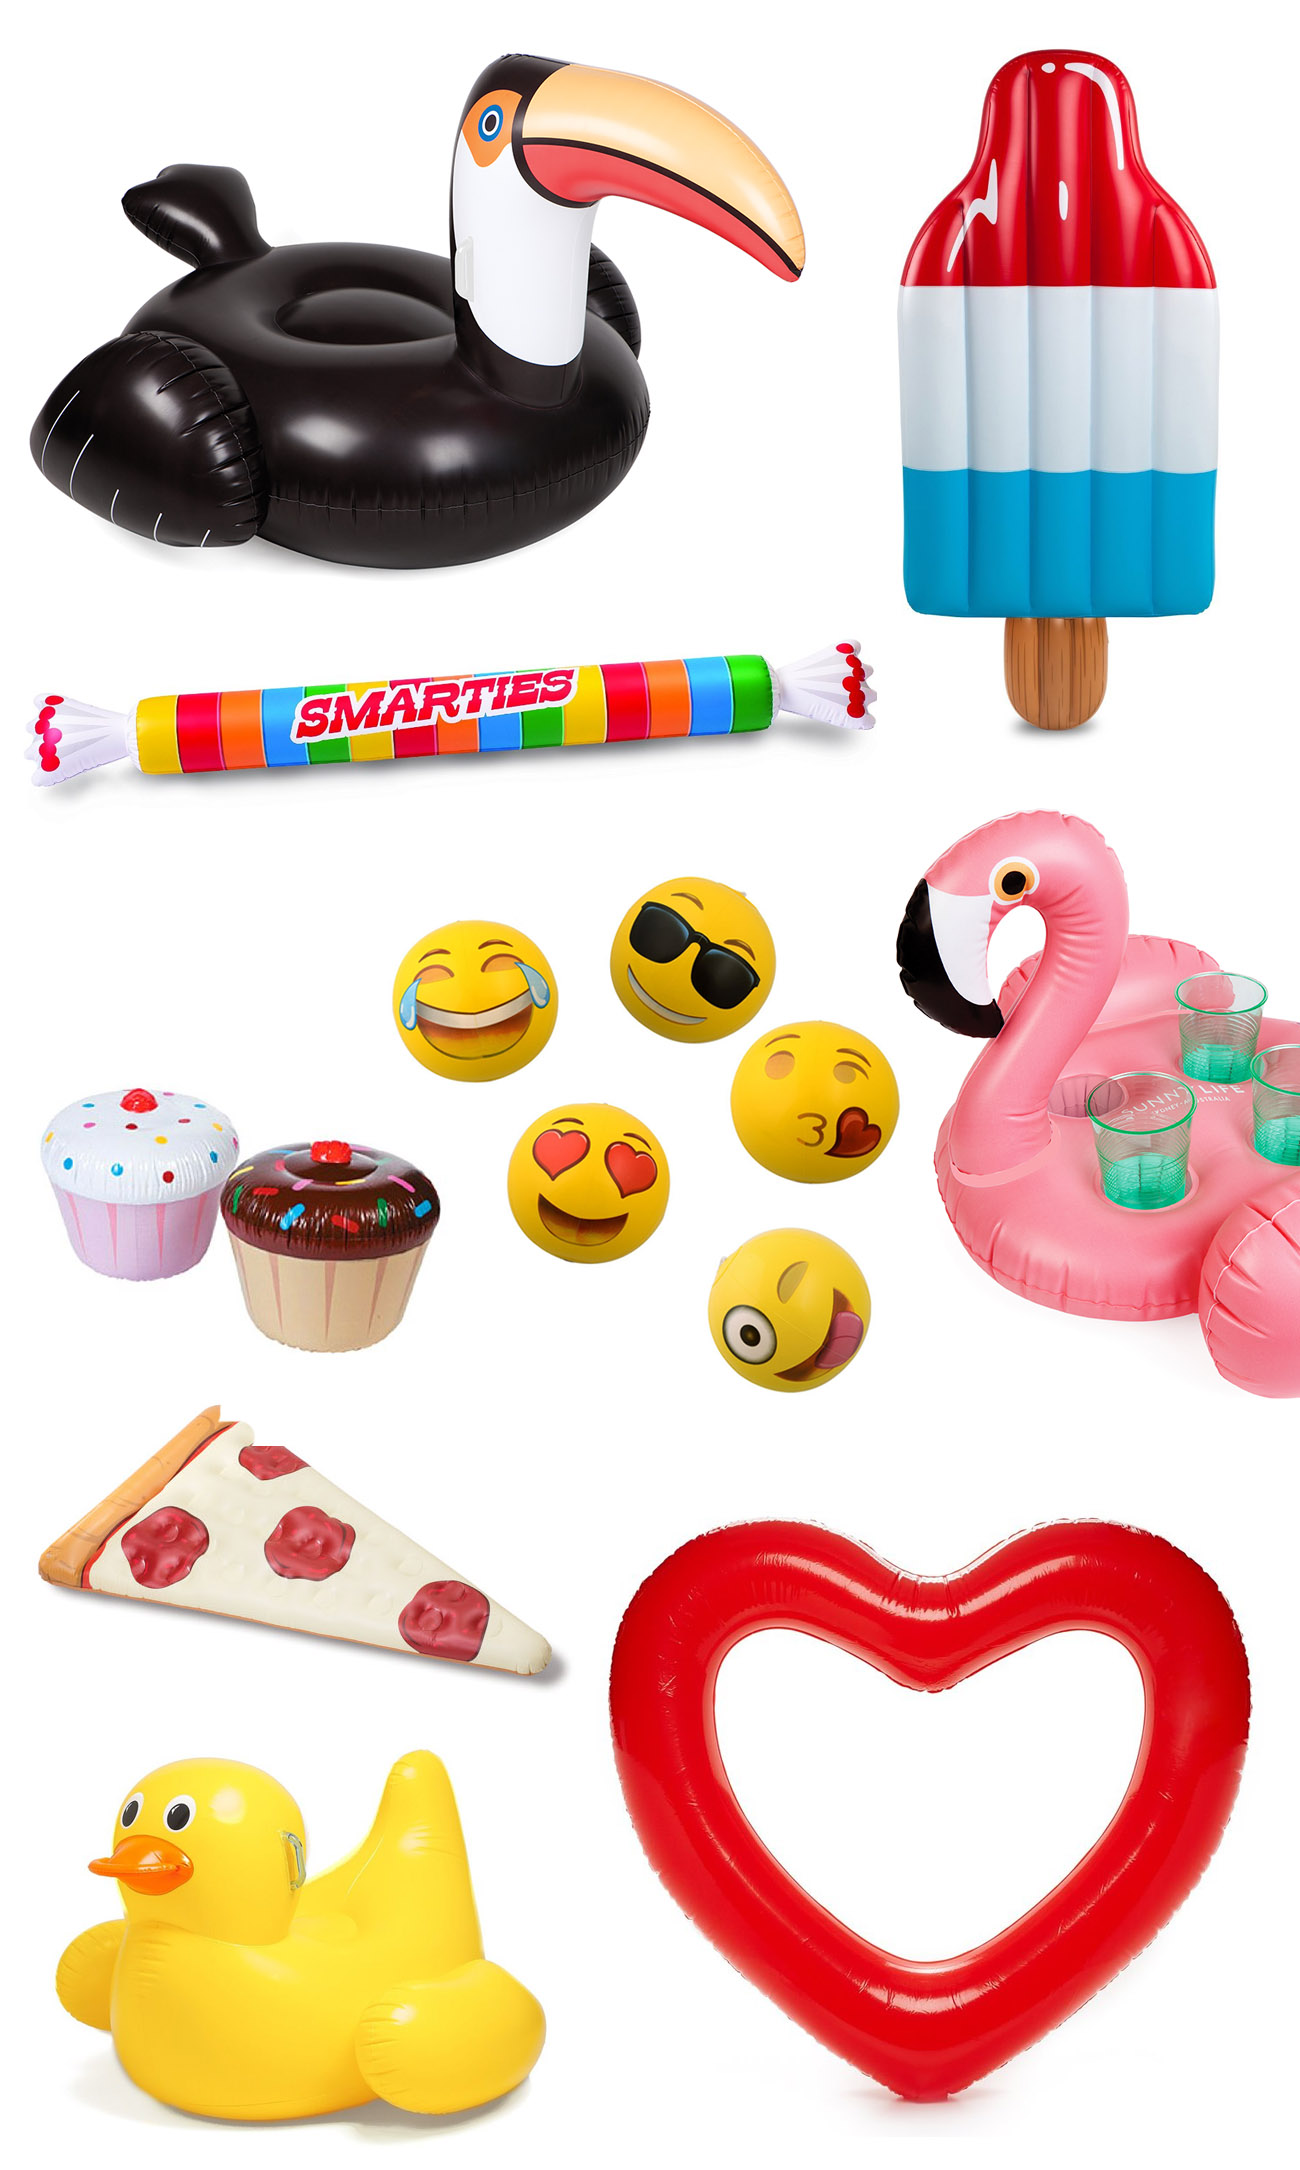 Pool Floats for Summer Parties